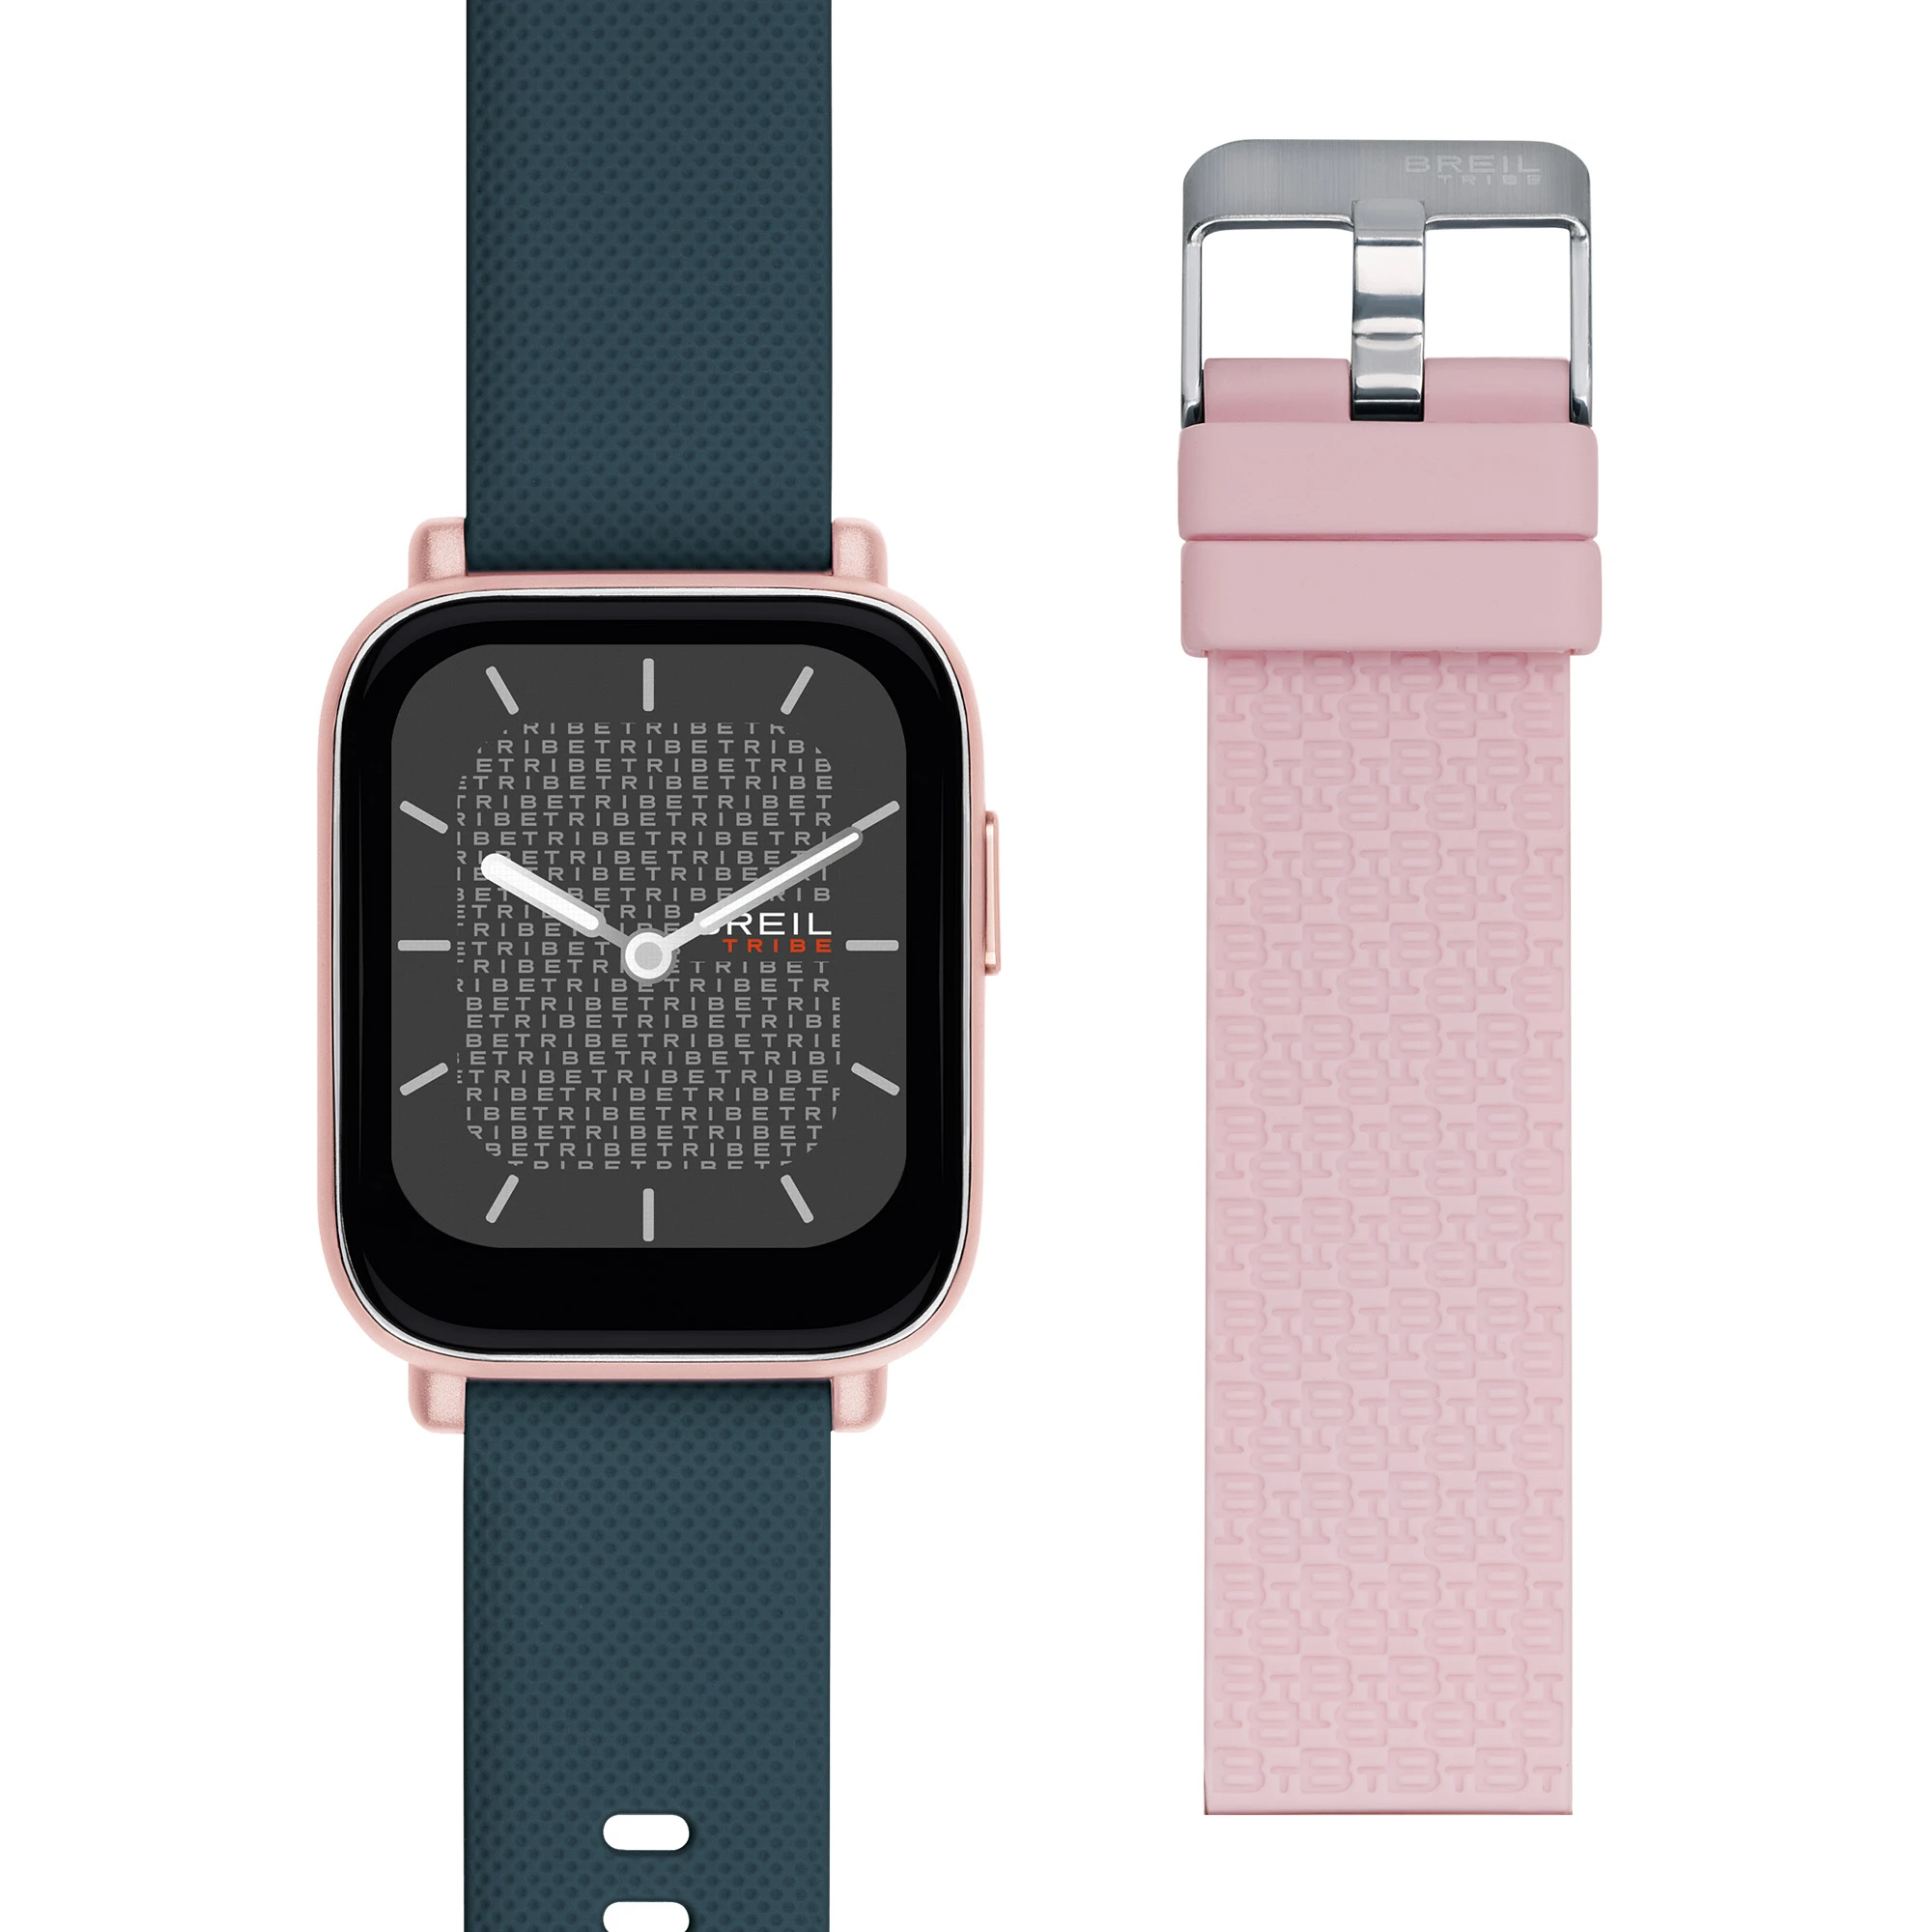 SBT-1 - SMARTWATCH WITH DOUBLE STRAP AND IP ROSE CASE - 1 - EW0603 | Breil